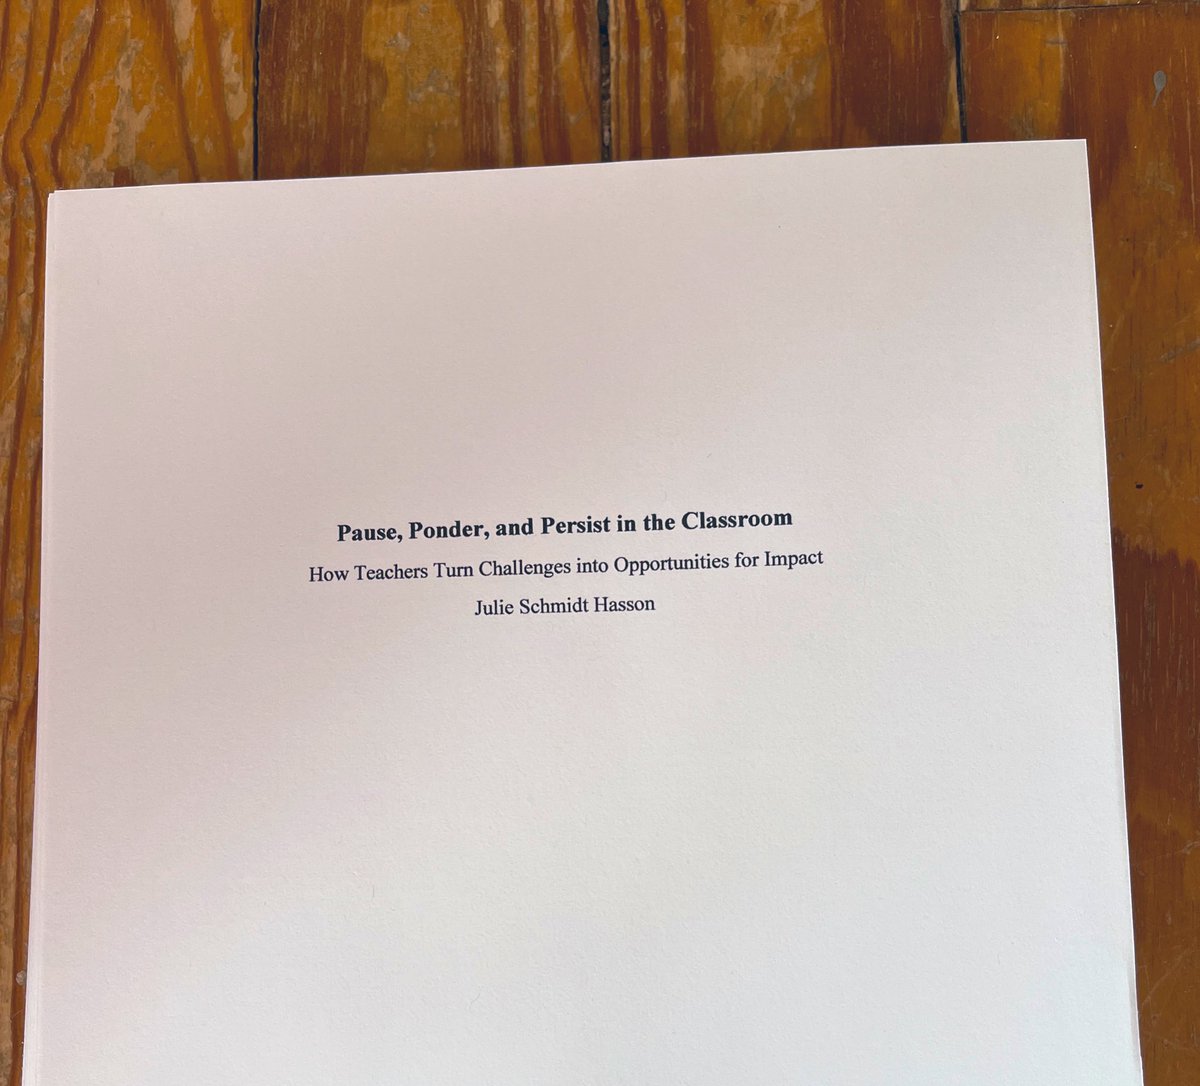 After nearly a year of researching, writing, and revising, this book baby is off to the publisher. I can’t wait to share more about the 3-step framework for turning challenges into opportunities for impact. #pauseponderpersist 
#education 
#teachersmatter